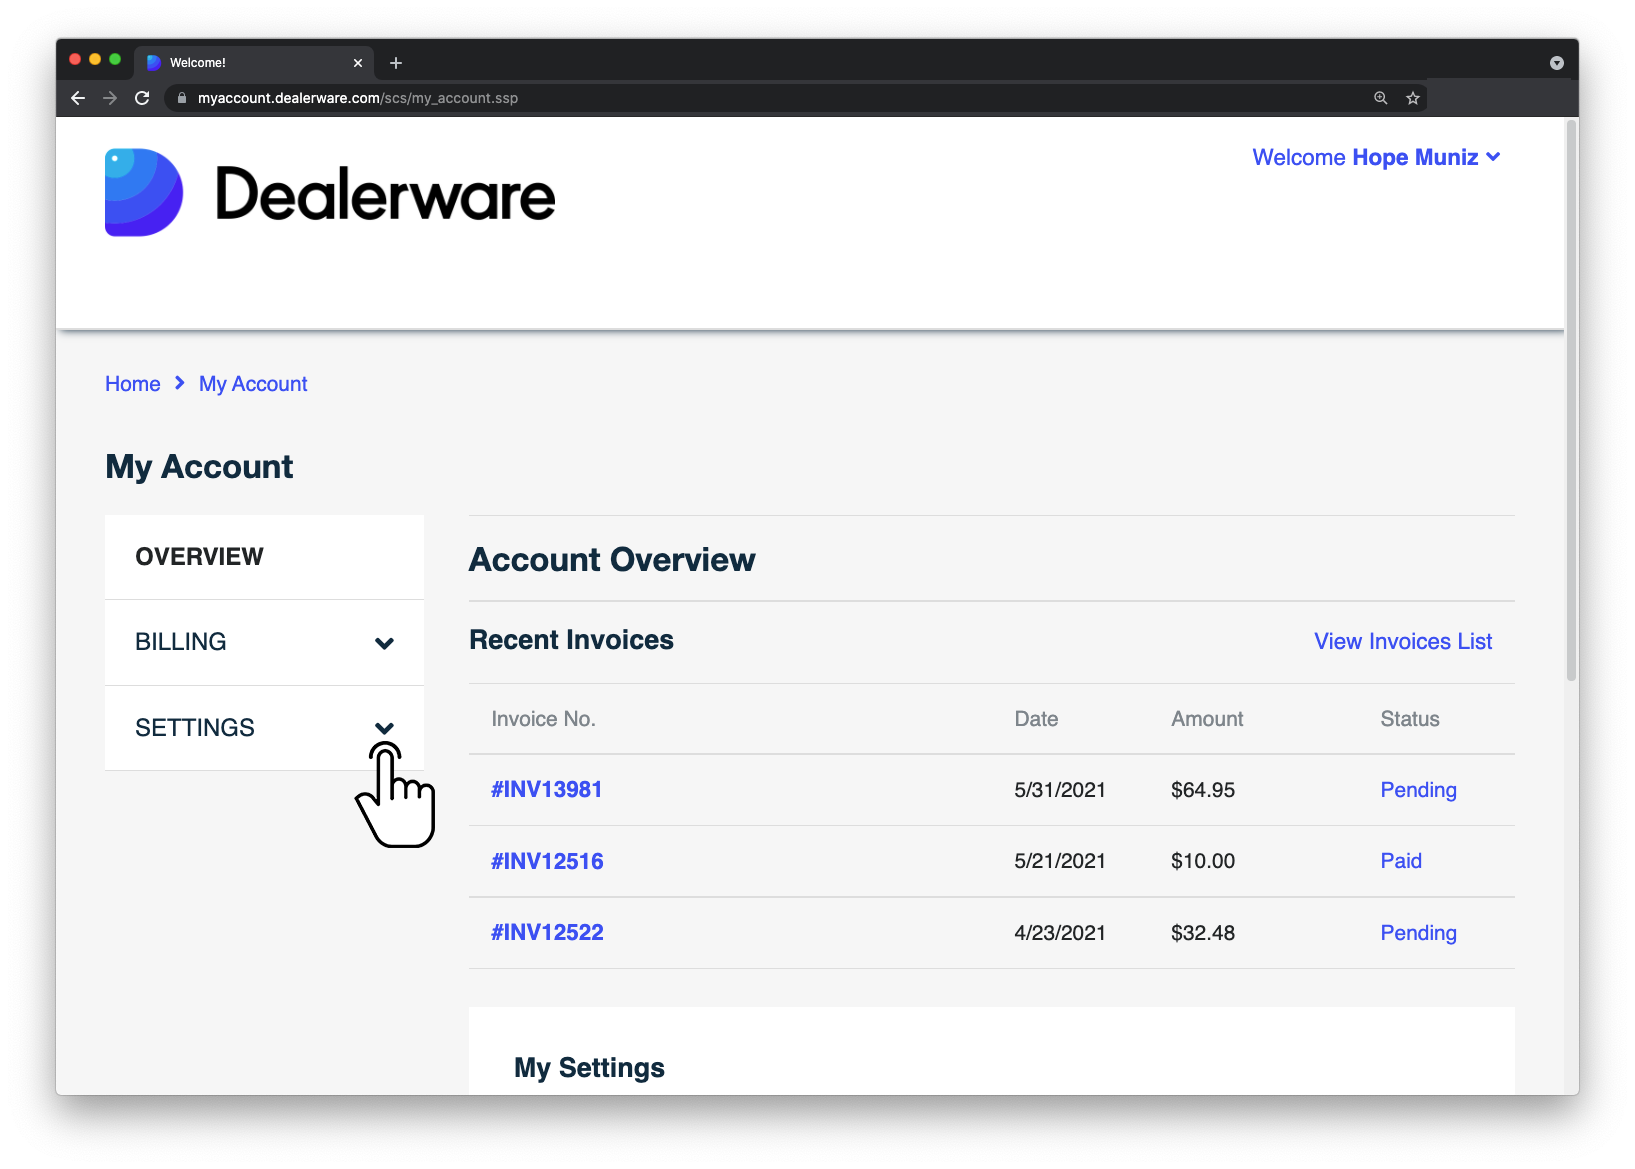 Image 1: Dealerware MyAccount screen, fingertap icon positioned over Settings option in Overview drop-down